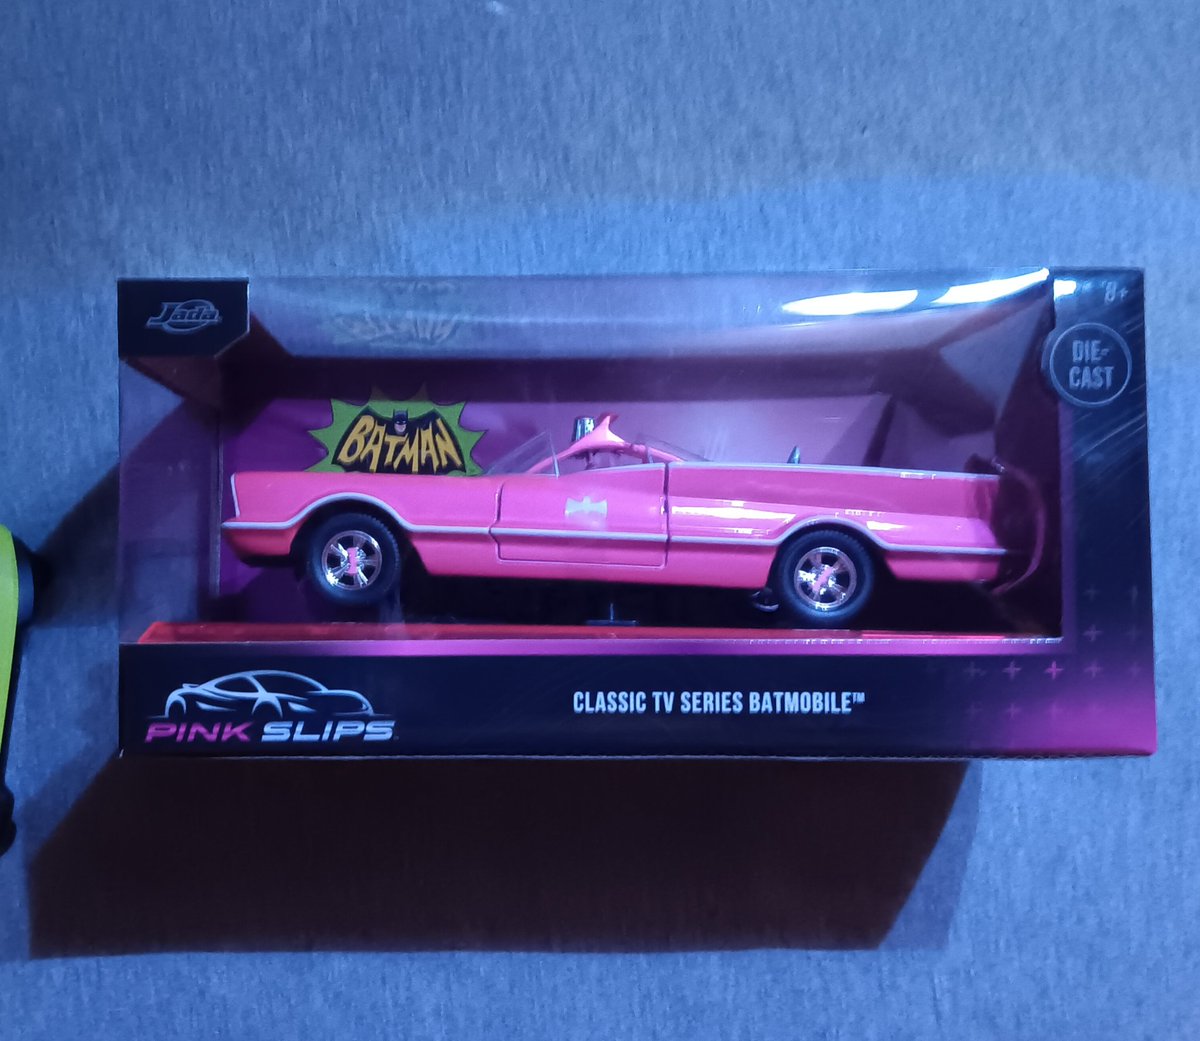 Pick this up the other day at Walmart for my wife.

The only problem is, I want one now.

PINK SLIPS BATMAN classic TV series BATMOBILE, 1:24 SCALE by Jada Toys

#Batman #Batmobile #PinkSlips #JadaToys